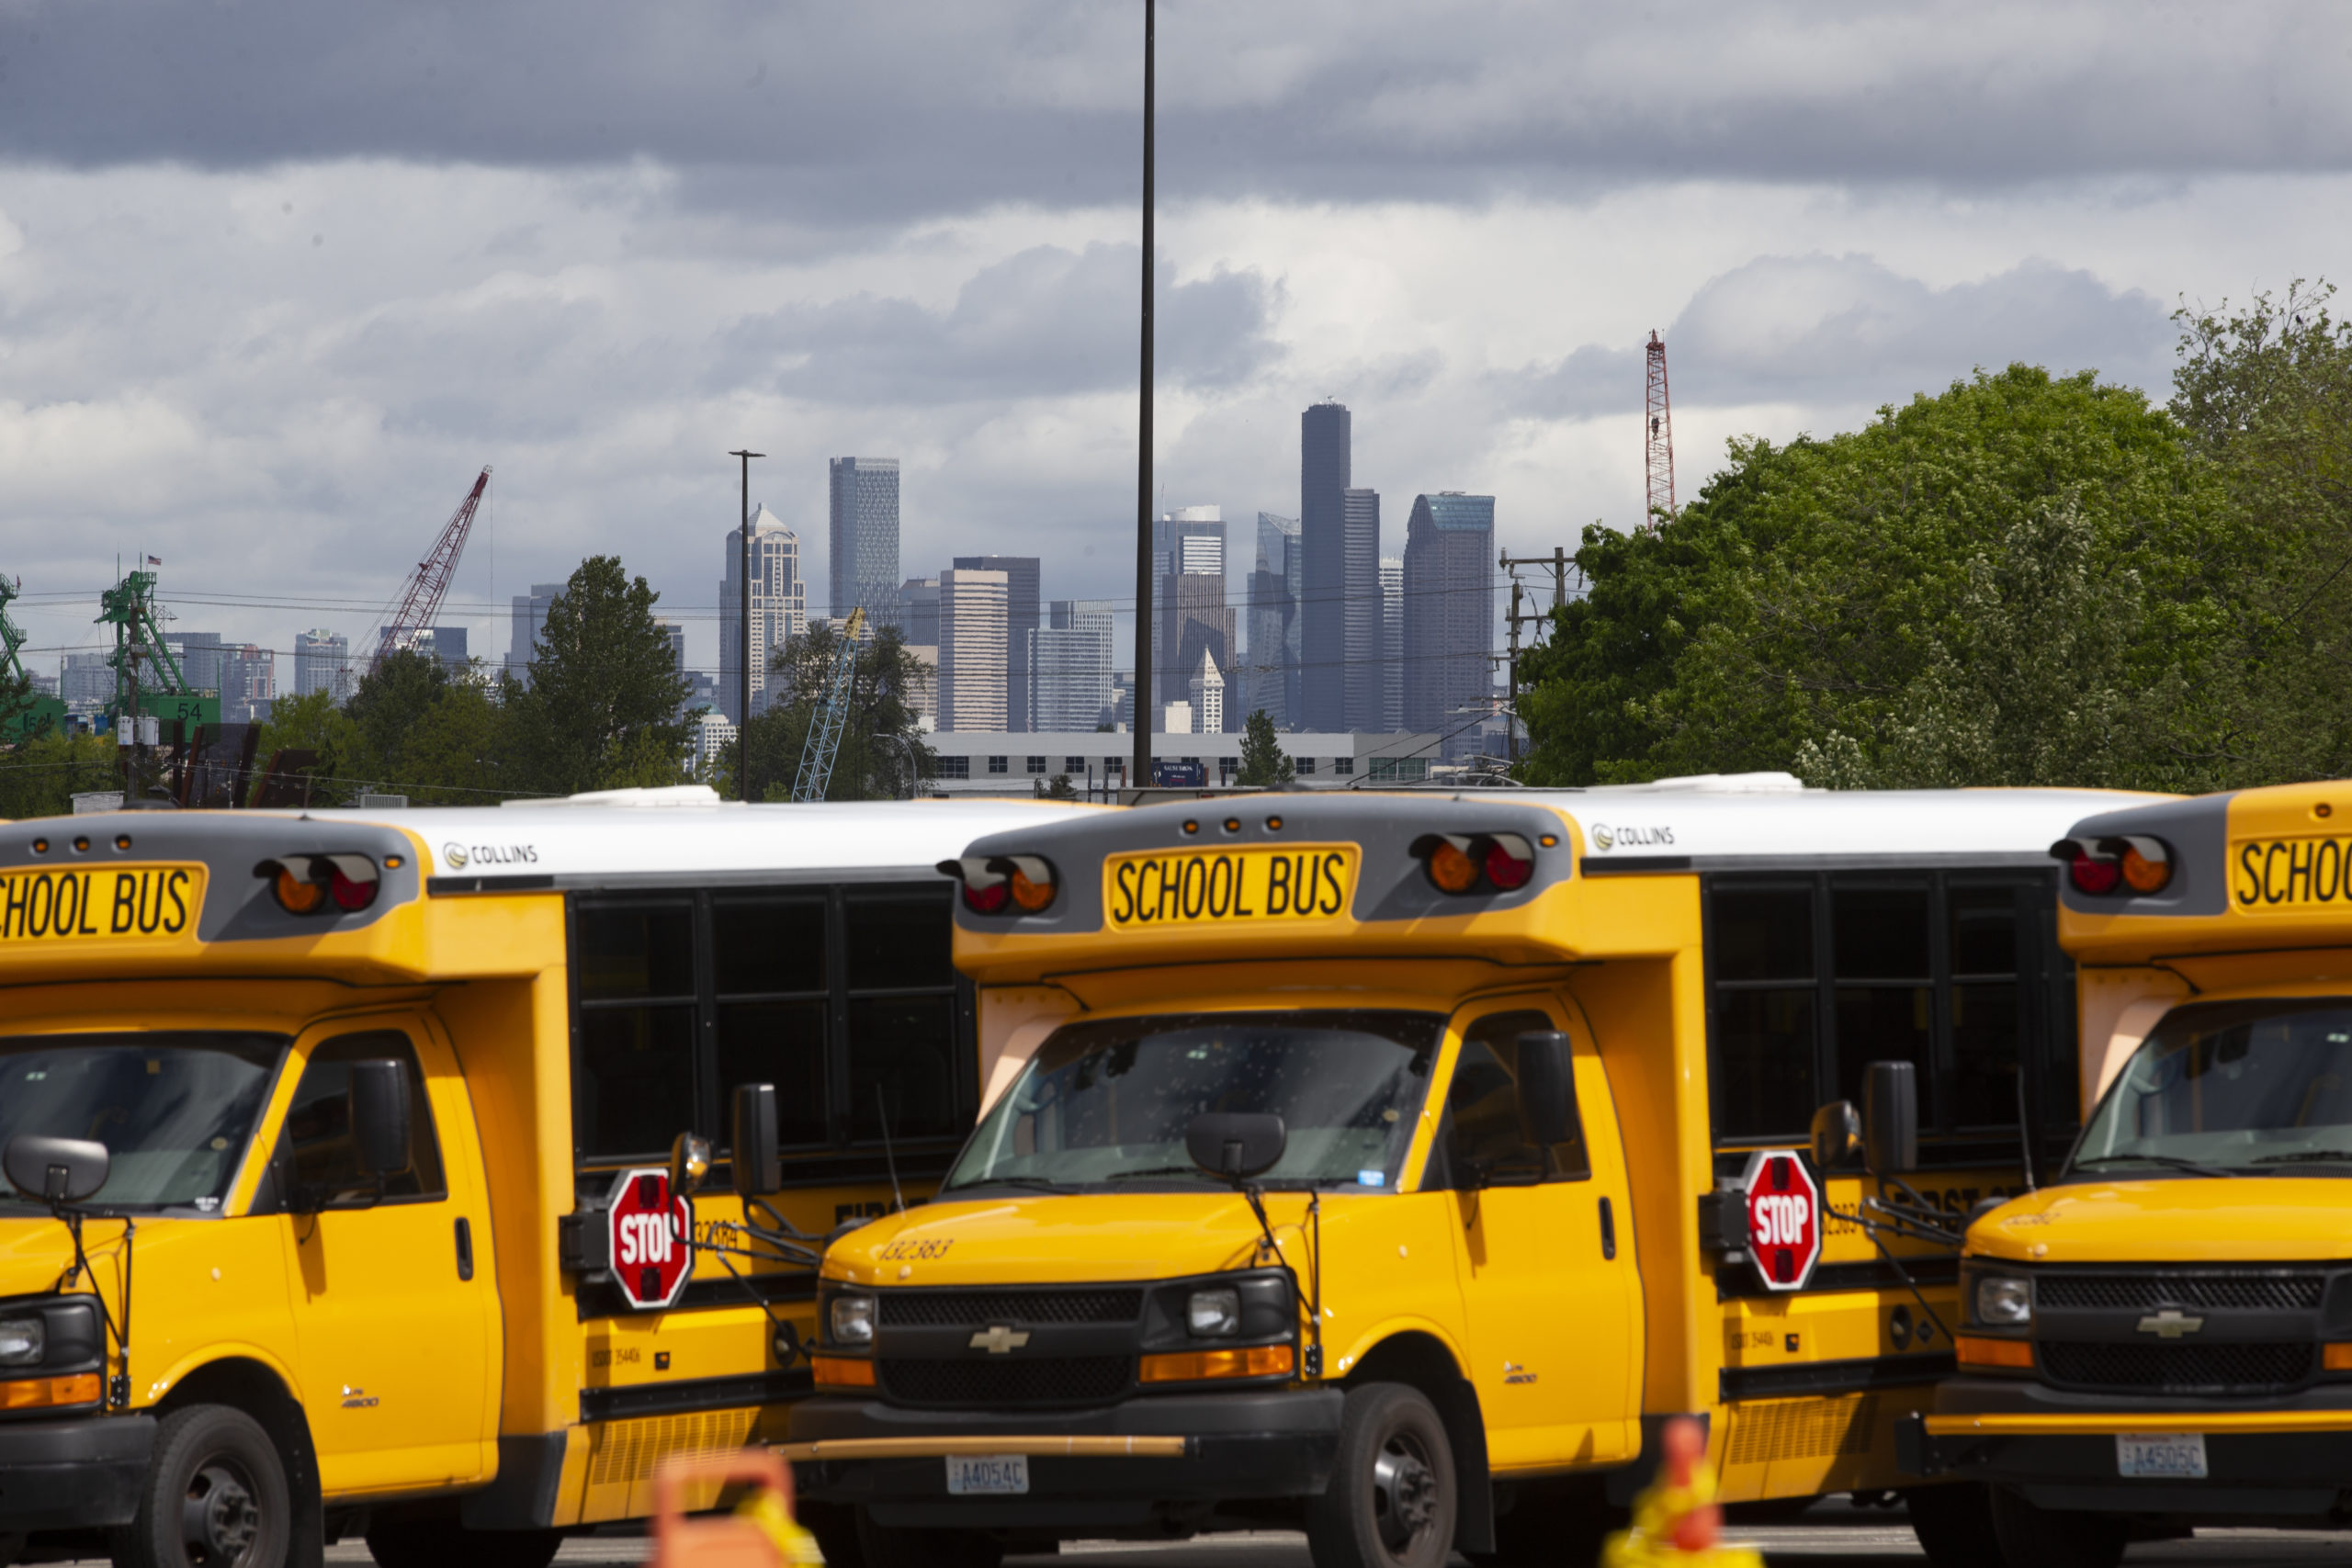 SEATTLE, WA - MAY 06: School buses sit idle in a bus yard on May 6, 2020 in Seattle, Washington. (Photo by Karen Ducey/Getty Images)